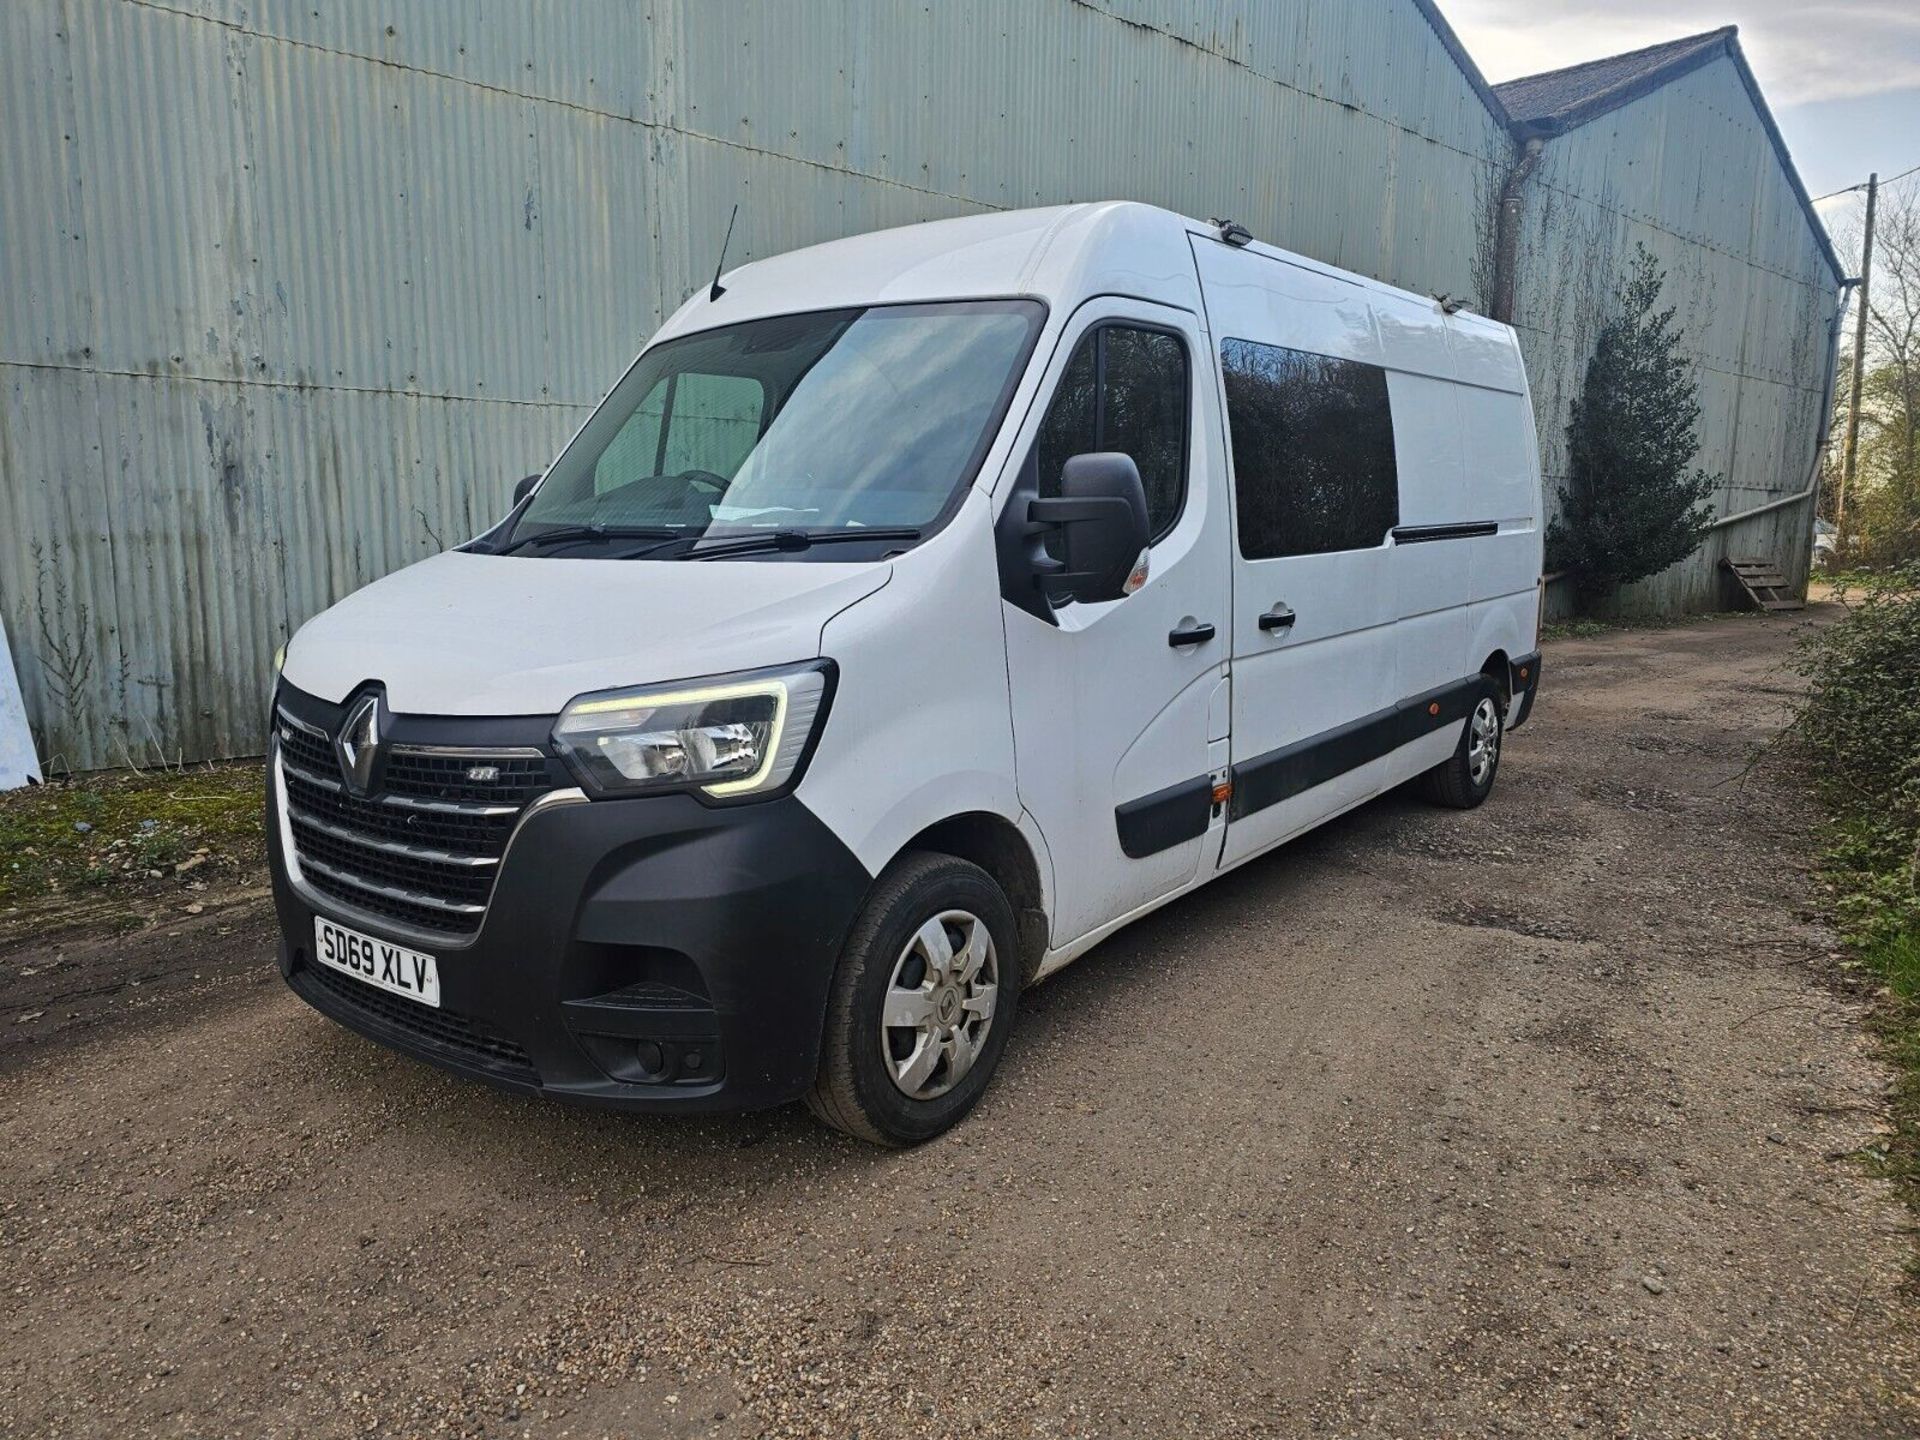 2019 RENAULT MASTER BUSINESS PLUS, FULLY LOADED - Image 2 of 5